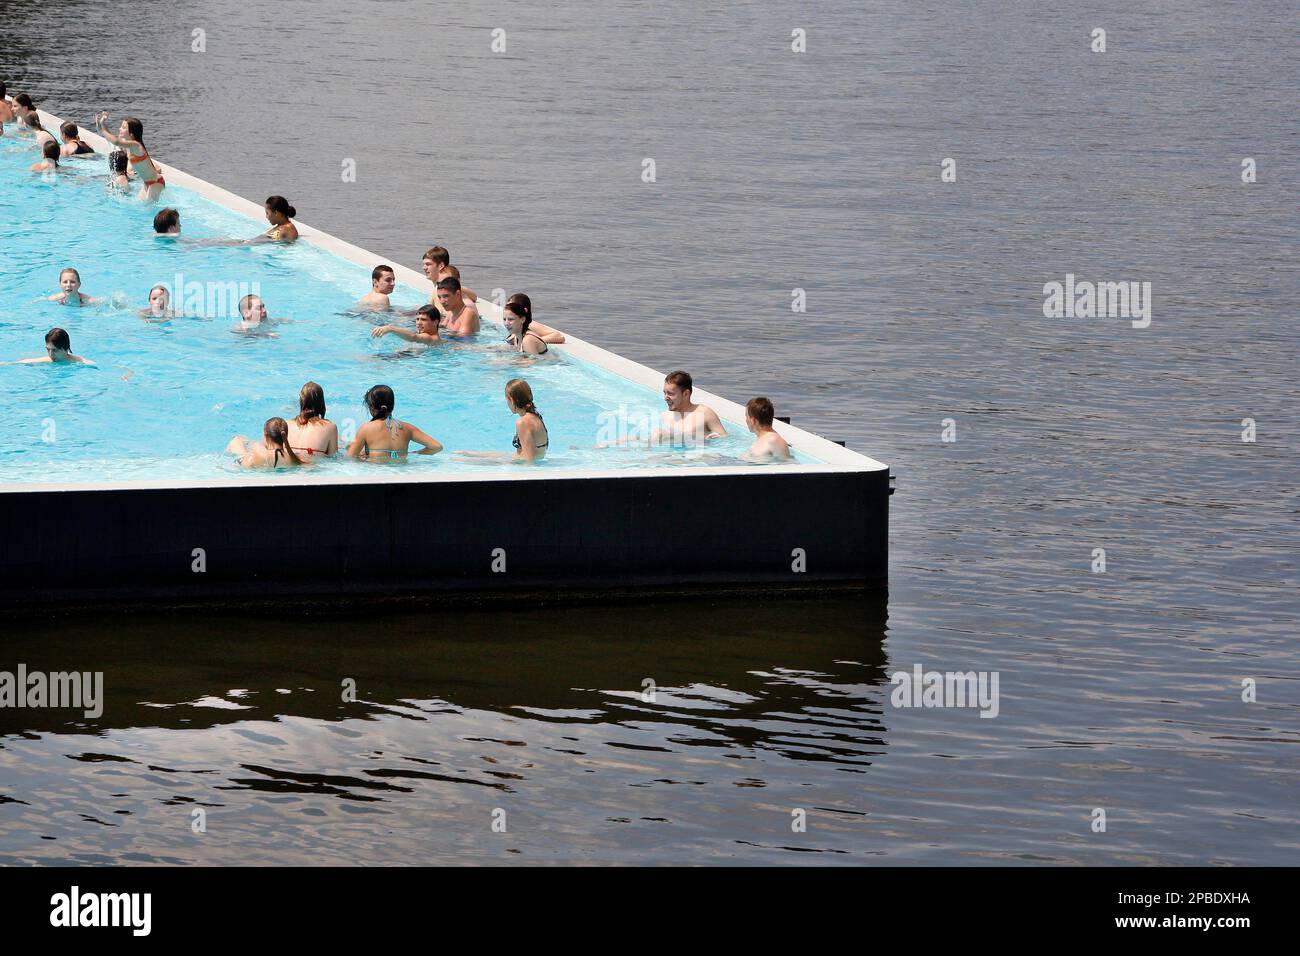 People relax in an outdoor swimming pool set into the River Spree in  Berlin, Tuesday, June 12, 2007. Many people used the temperatures around 31 degrees  Celsius (87 degrees Fahrenheit) to cool